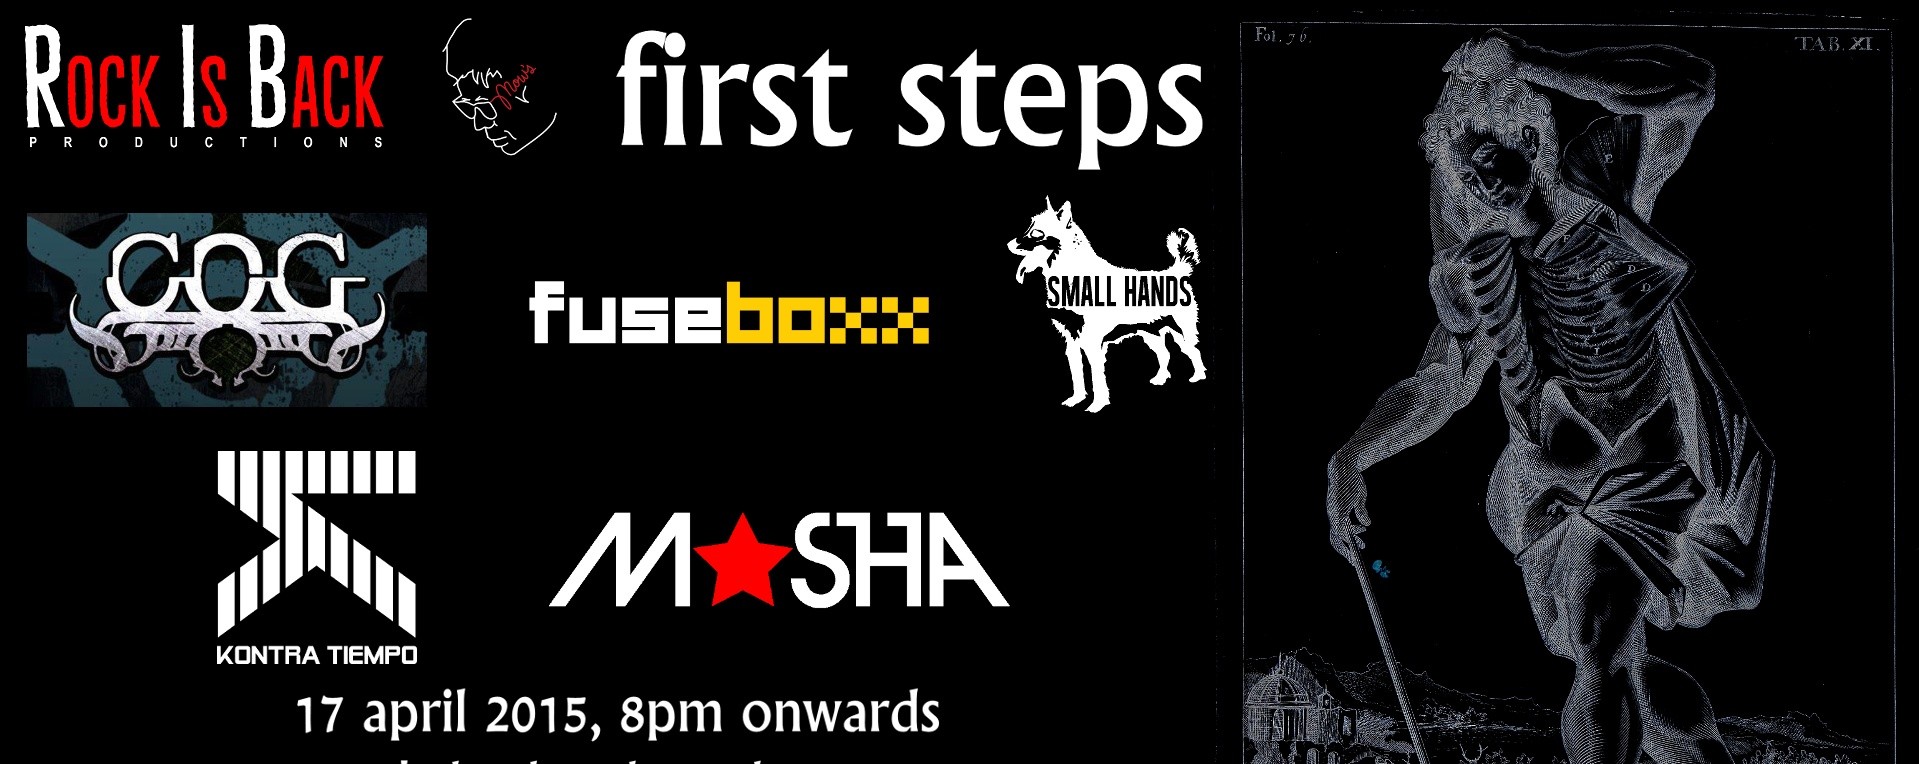 First Steps: The Rock Is Back Productions Launch 